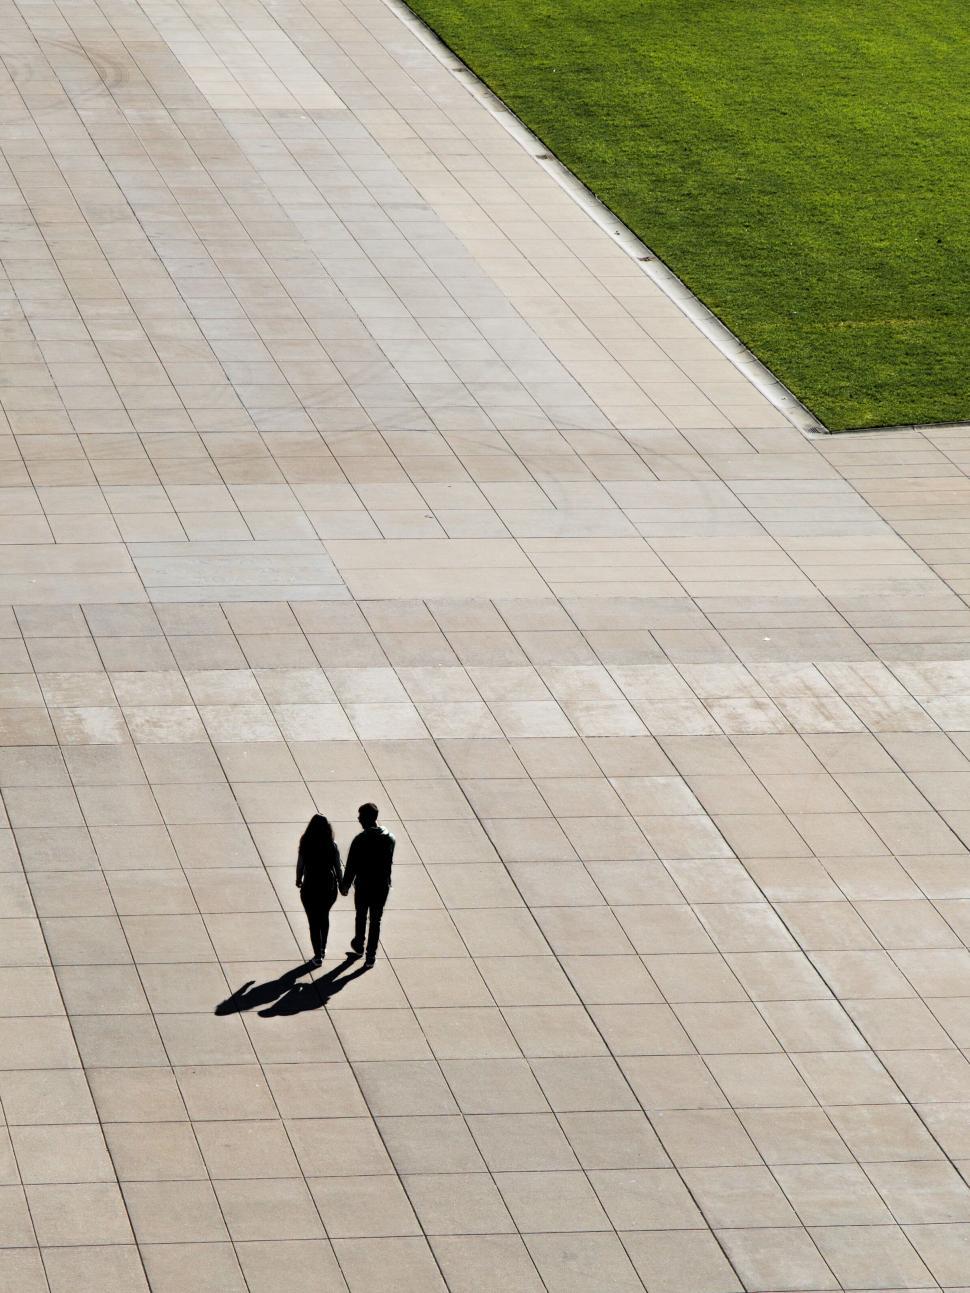 Free Image of Aerial view of two people walking on pavement 